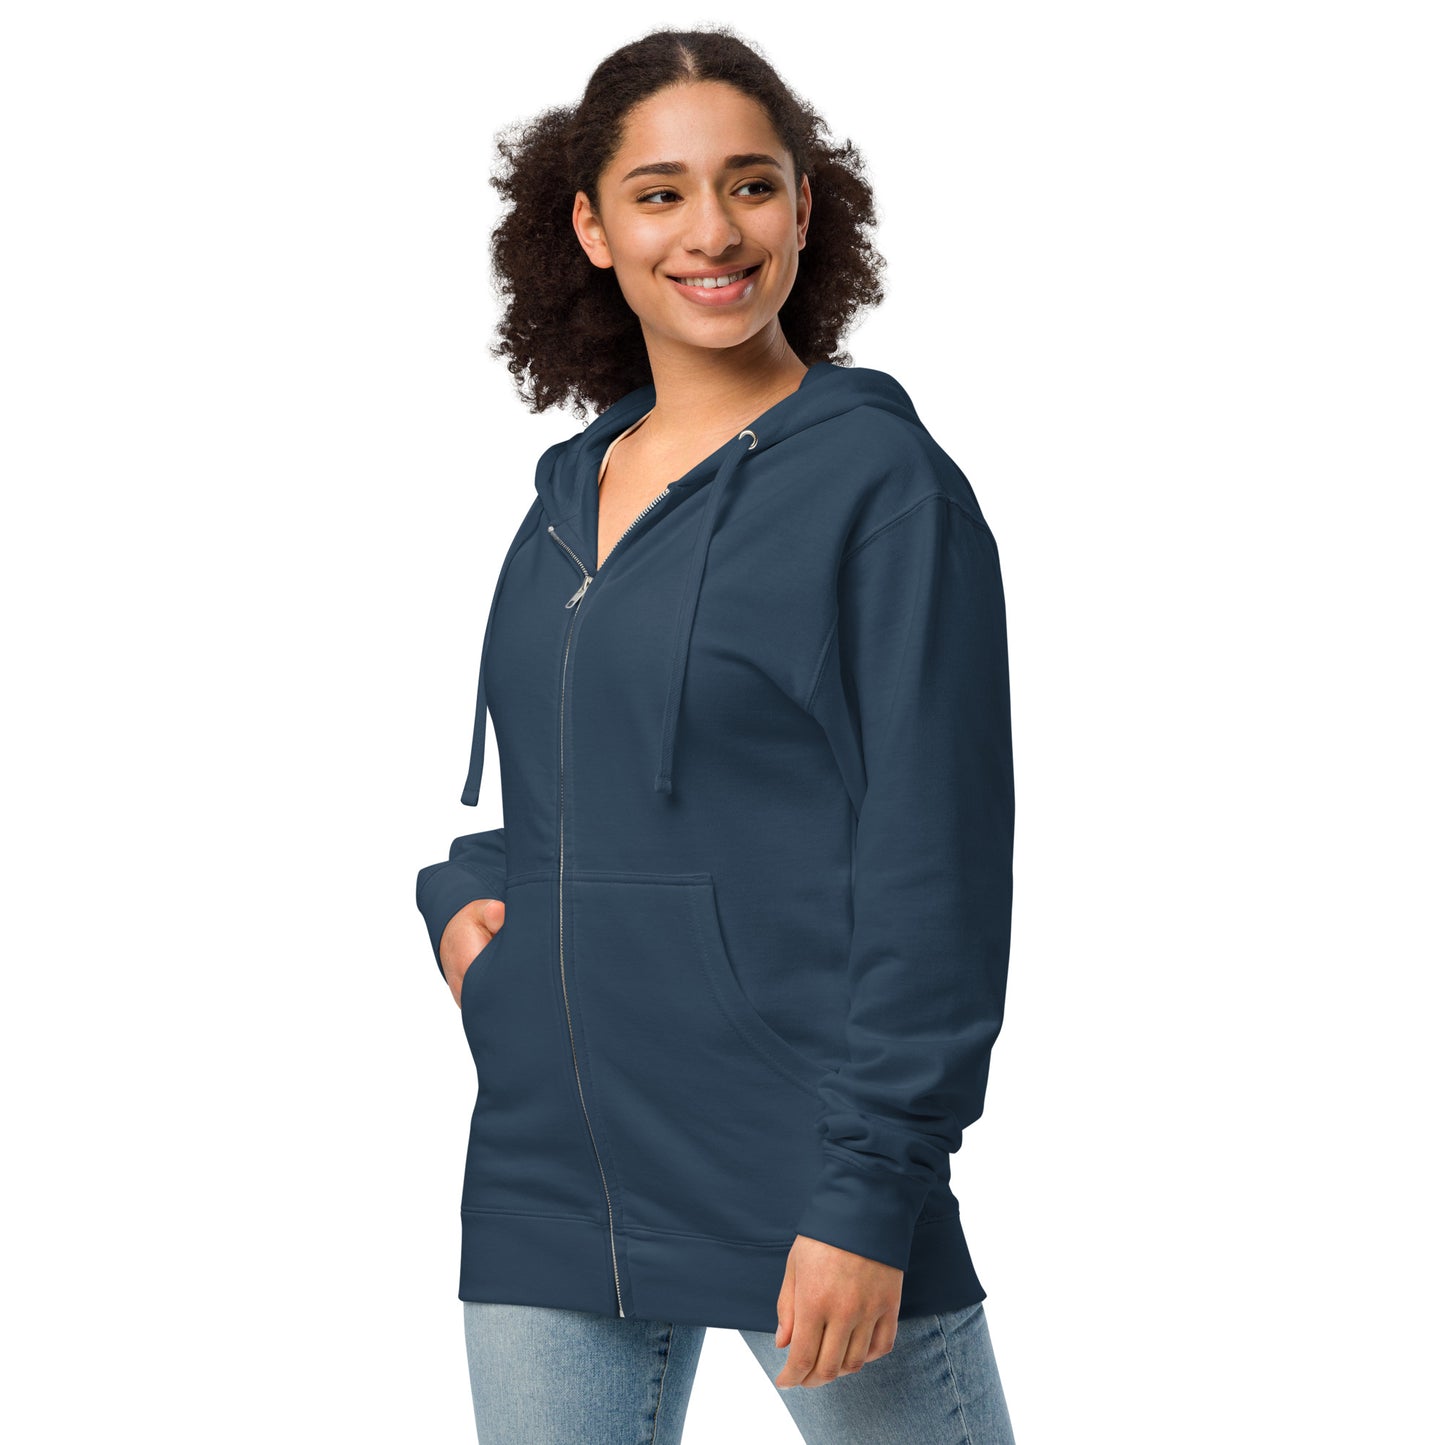 Unisex fleece-lined navy blue colored zip-up hoodie with silently judging text by black crow wearing a monocle in a square with blue paint splatters.  Design on the back of hoodie. Image shows front of hoodie zipped up on female model.